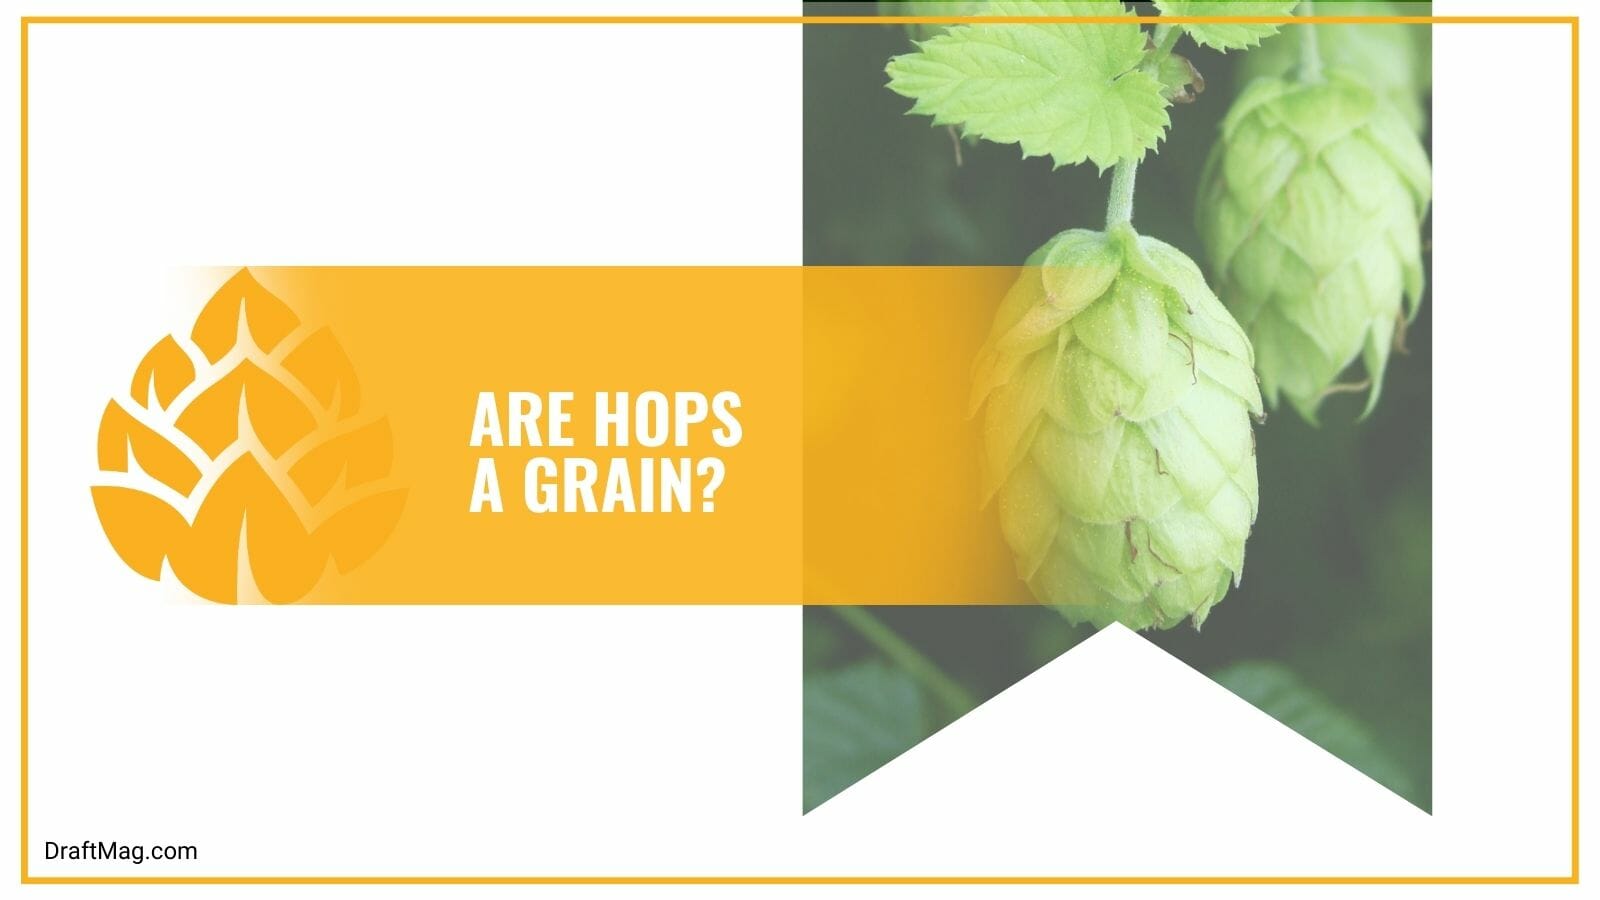 Are Hops a Grain